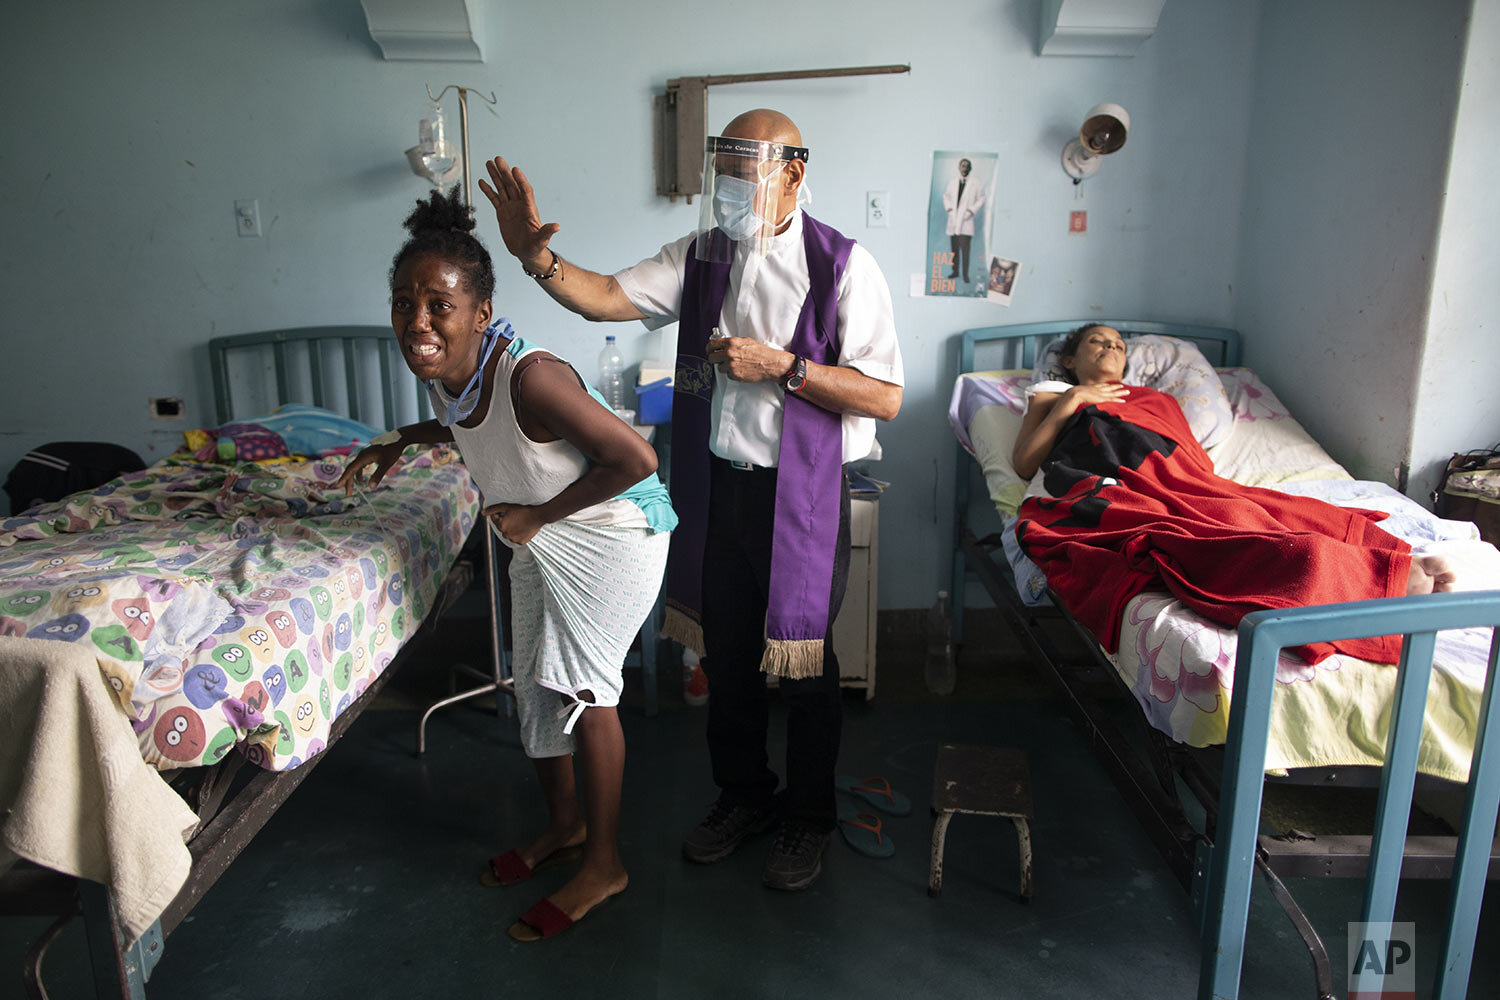  Father Felix Mendoza, a Venezuelan Catholic priest, prays over a woman who cries that she is in physical pain at a public hospital in Caracas, Venezuela, May 11, 2021, amid the new coronavirus pandemic. (AP Photo/Ariana Cubillos) 